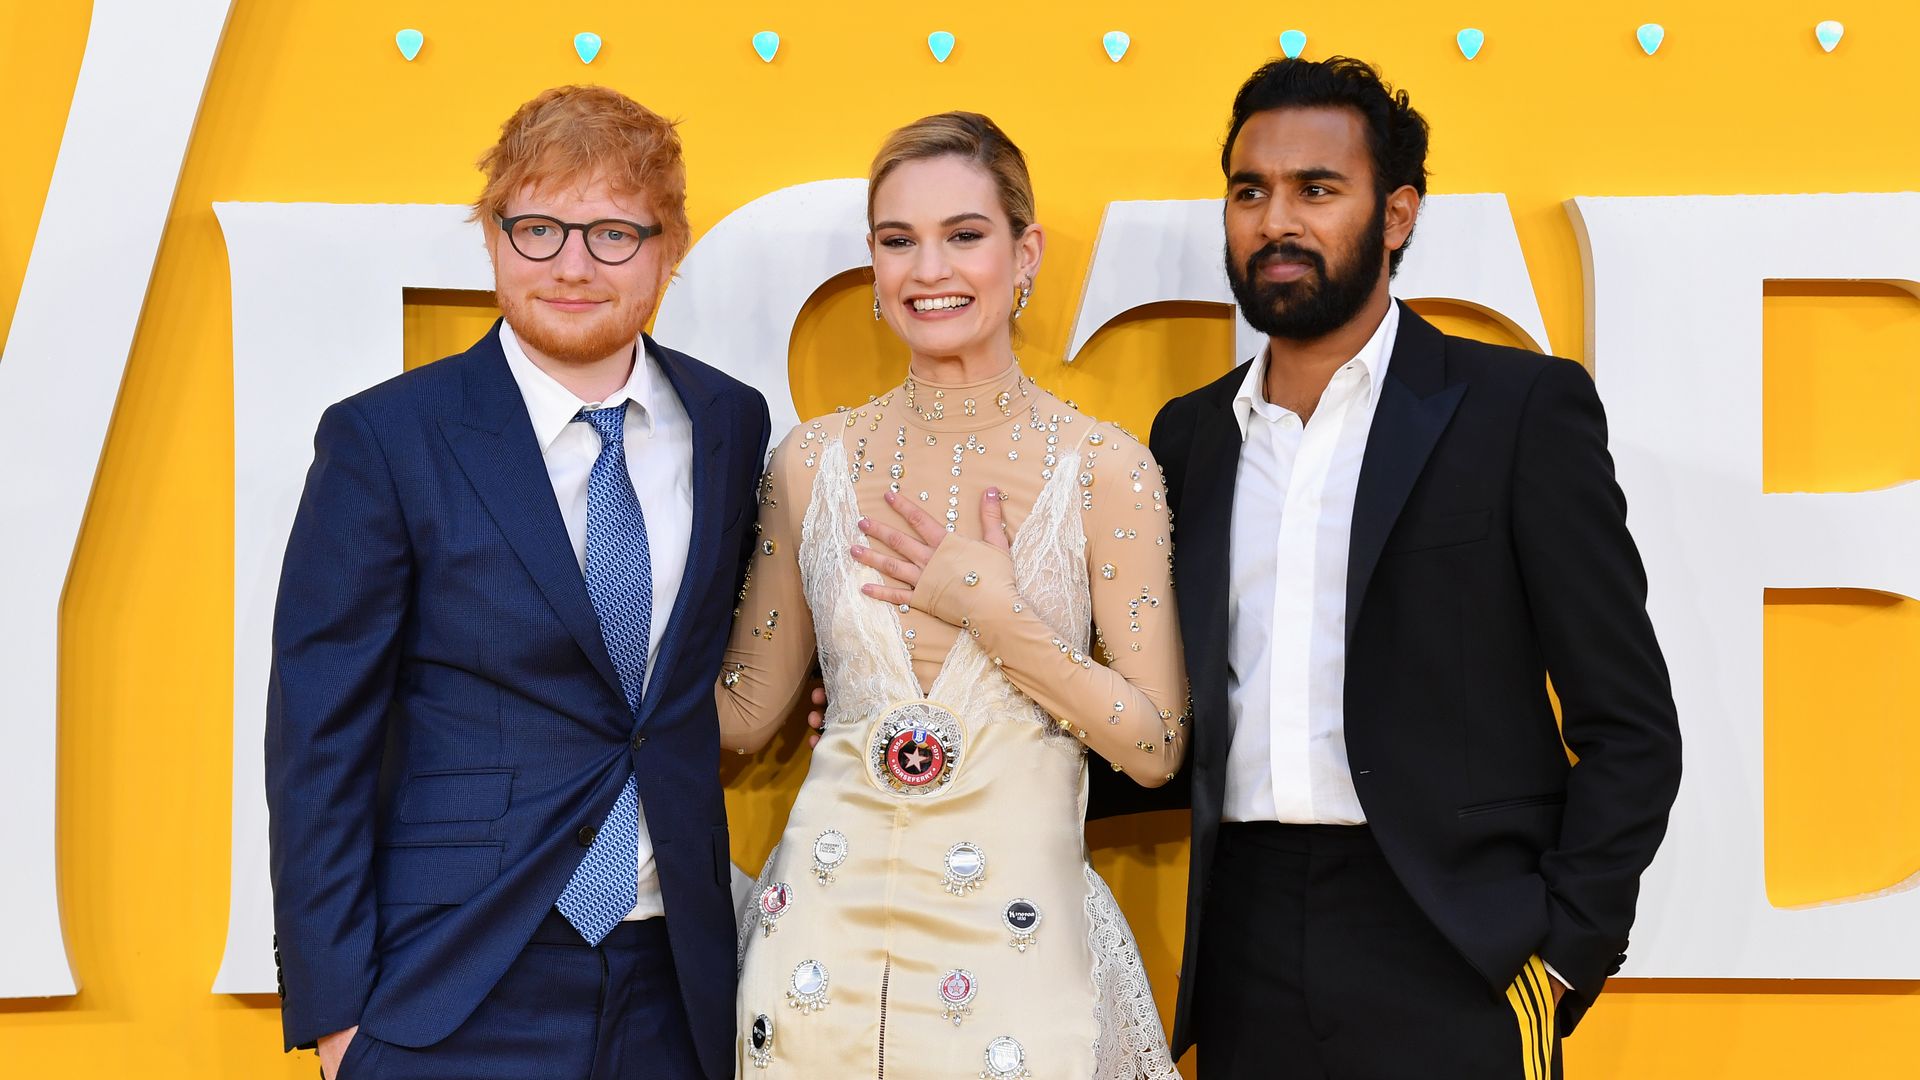 Lily James at the Yesterday premiere alongside Ed Sheeran and Himesh Patel